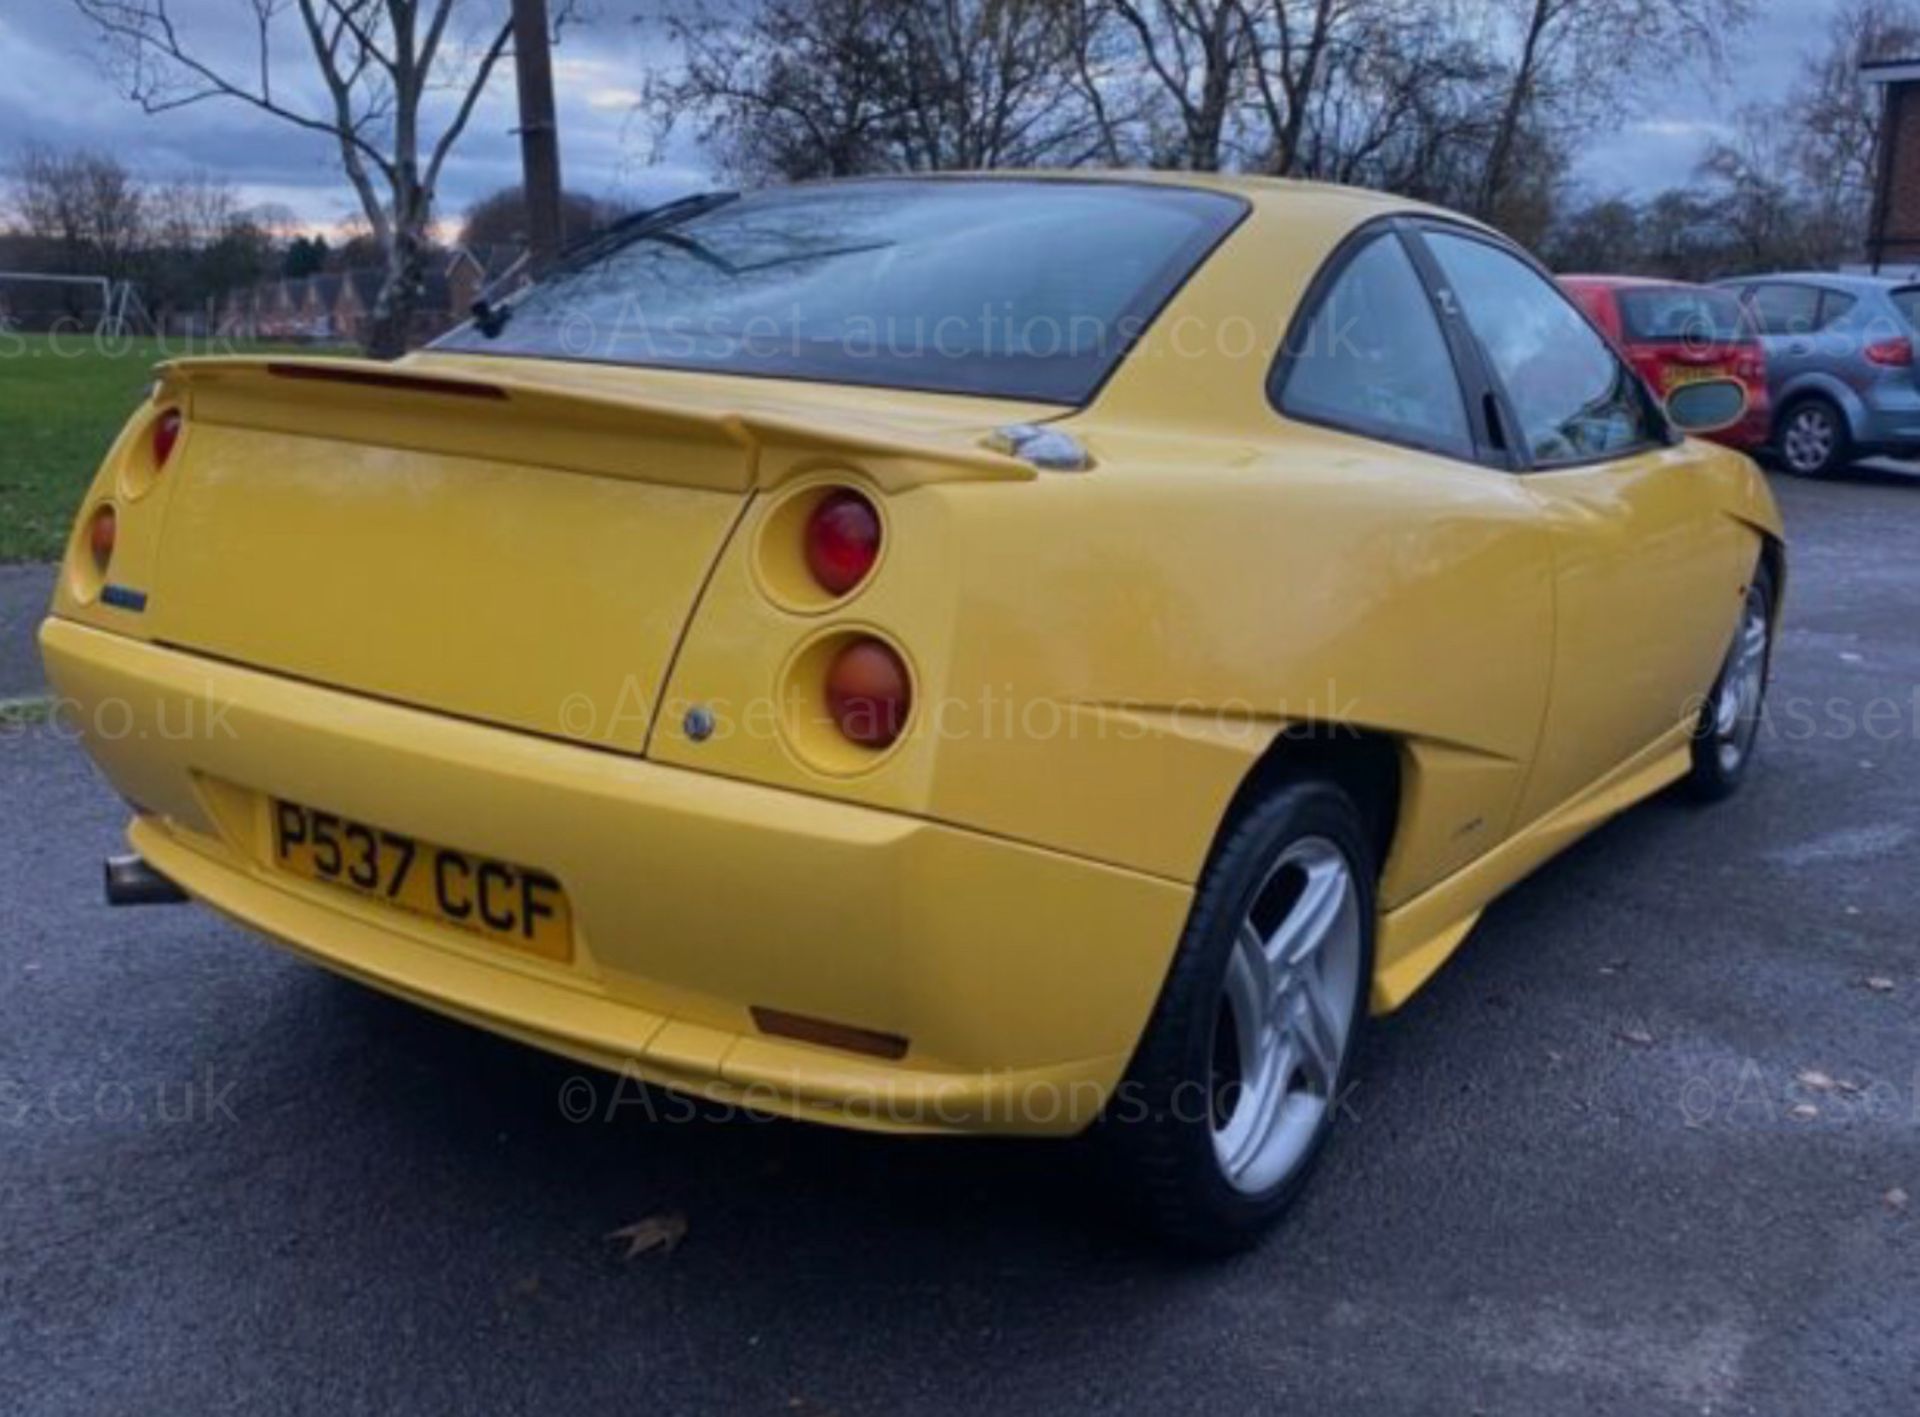 1996 FIAT COUPE 20V TURBO YELLOW SALOON, 2.0 PETROL ENGINE, SHOWING 95K MILES *NO VAT* - Image 7 of 12